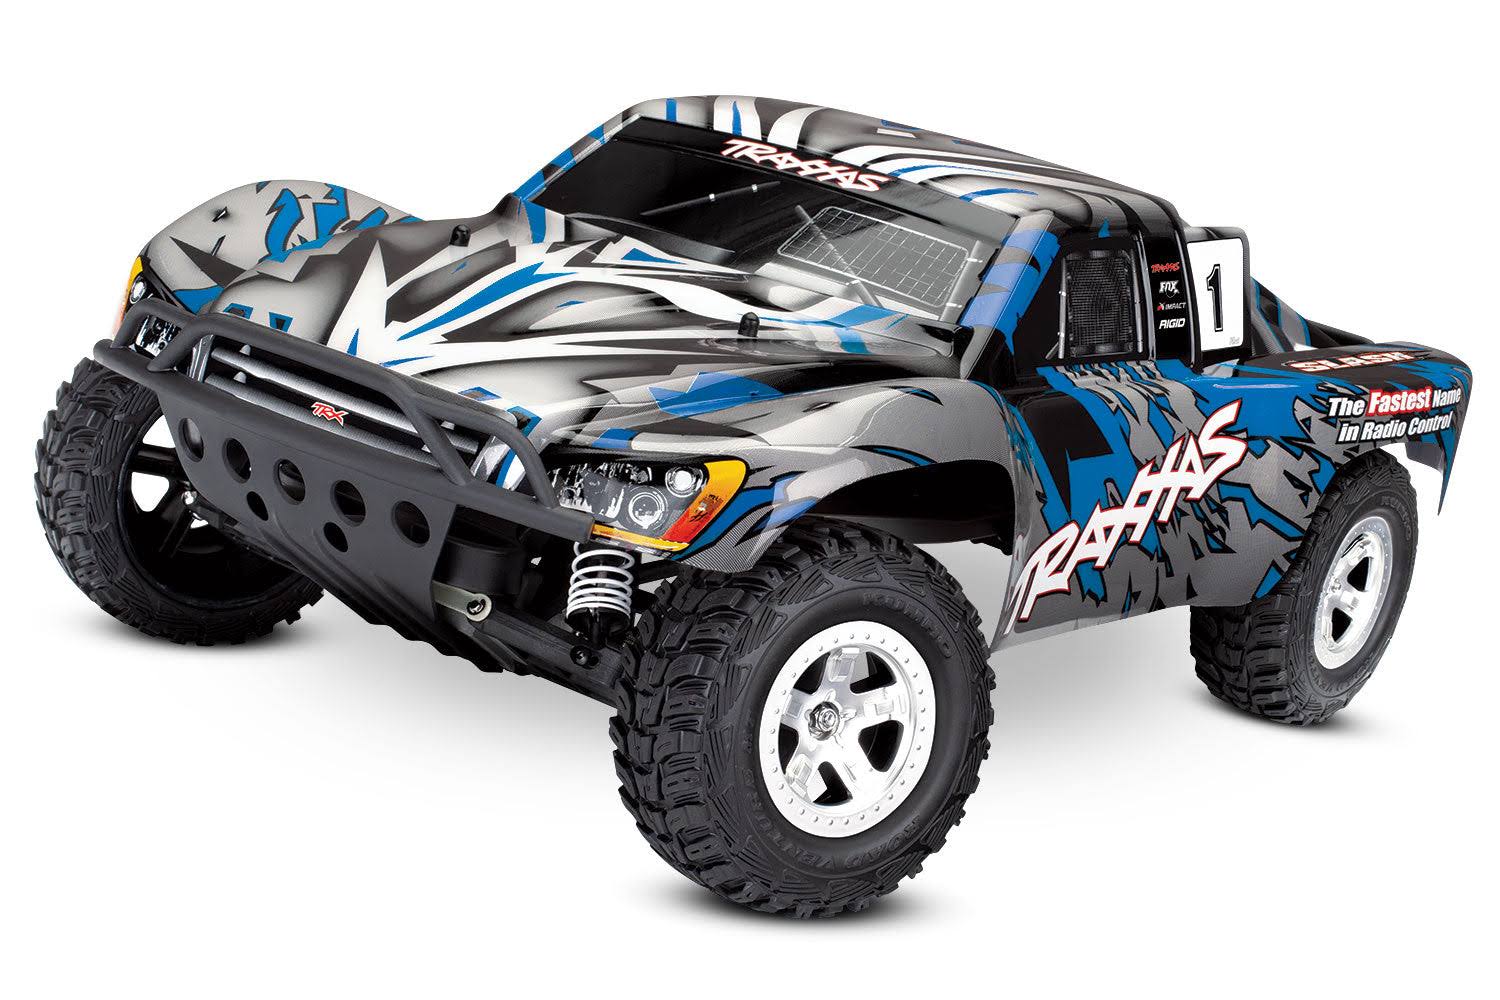 Traxxas Slash 2WD 1/10 Blue, Brushed, No Battery/Charger